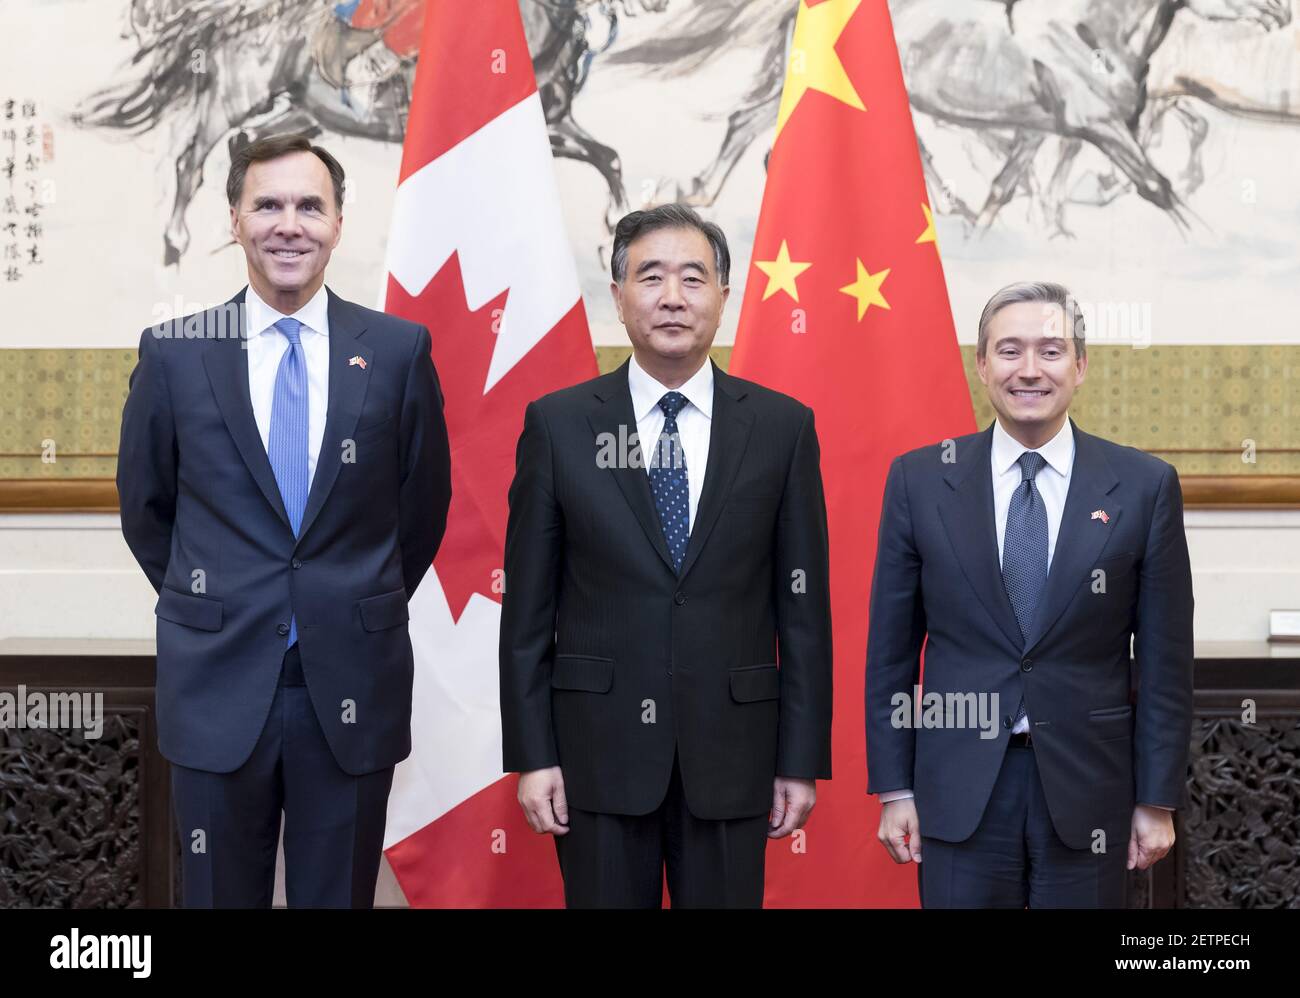 (170425) -- BEIJING , April 25, 2017 (Xinhua) -- Chinese Vice Premier Wang Yang (C), along with Canadian Finance Minister Morneau (L) and Canadian International Trade Minister Champagne, launches the China-Canada Economic and Financial Strategic Dialogue in Beijing, capital of China, April 25, 2017. (Xinhua/Ding Haitao) (dhf) (Photo by Xinhua/Sipa USA) Stock Photo